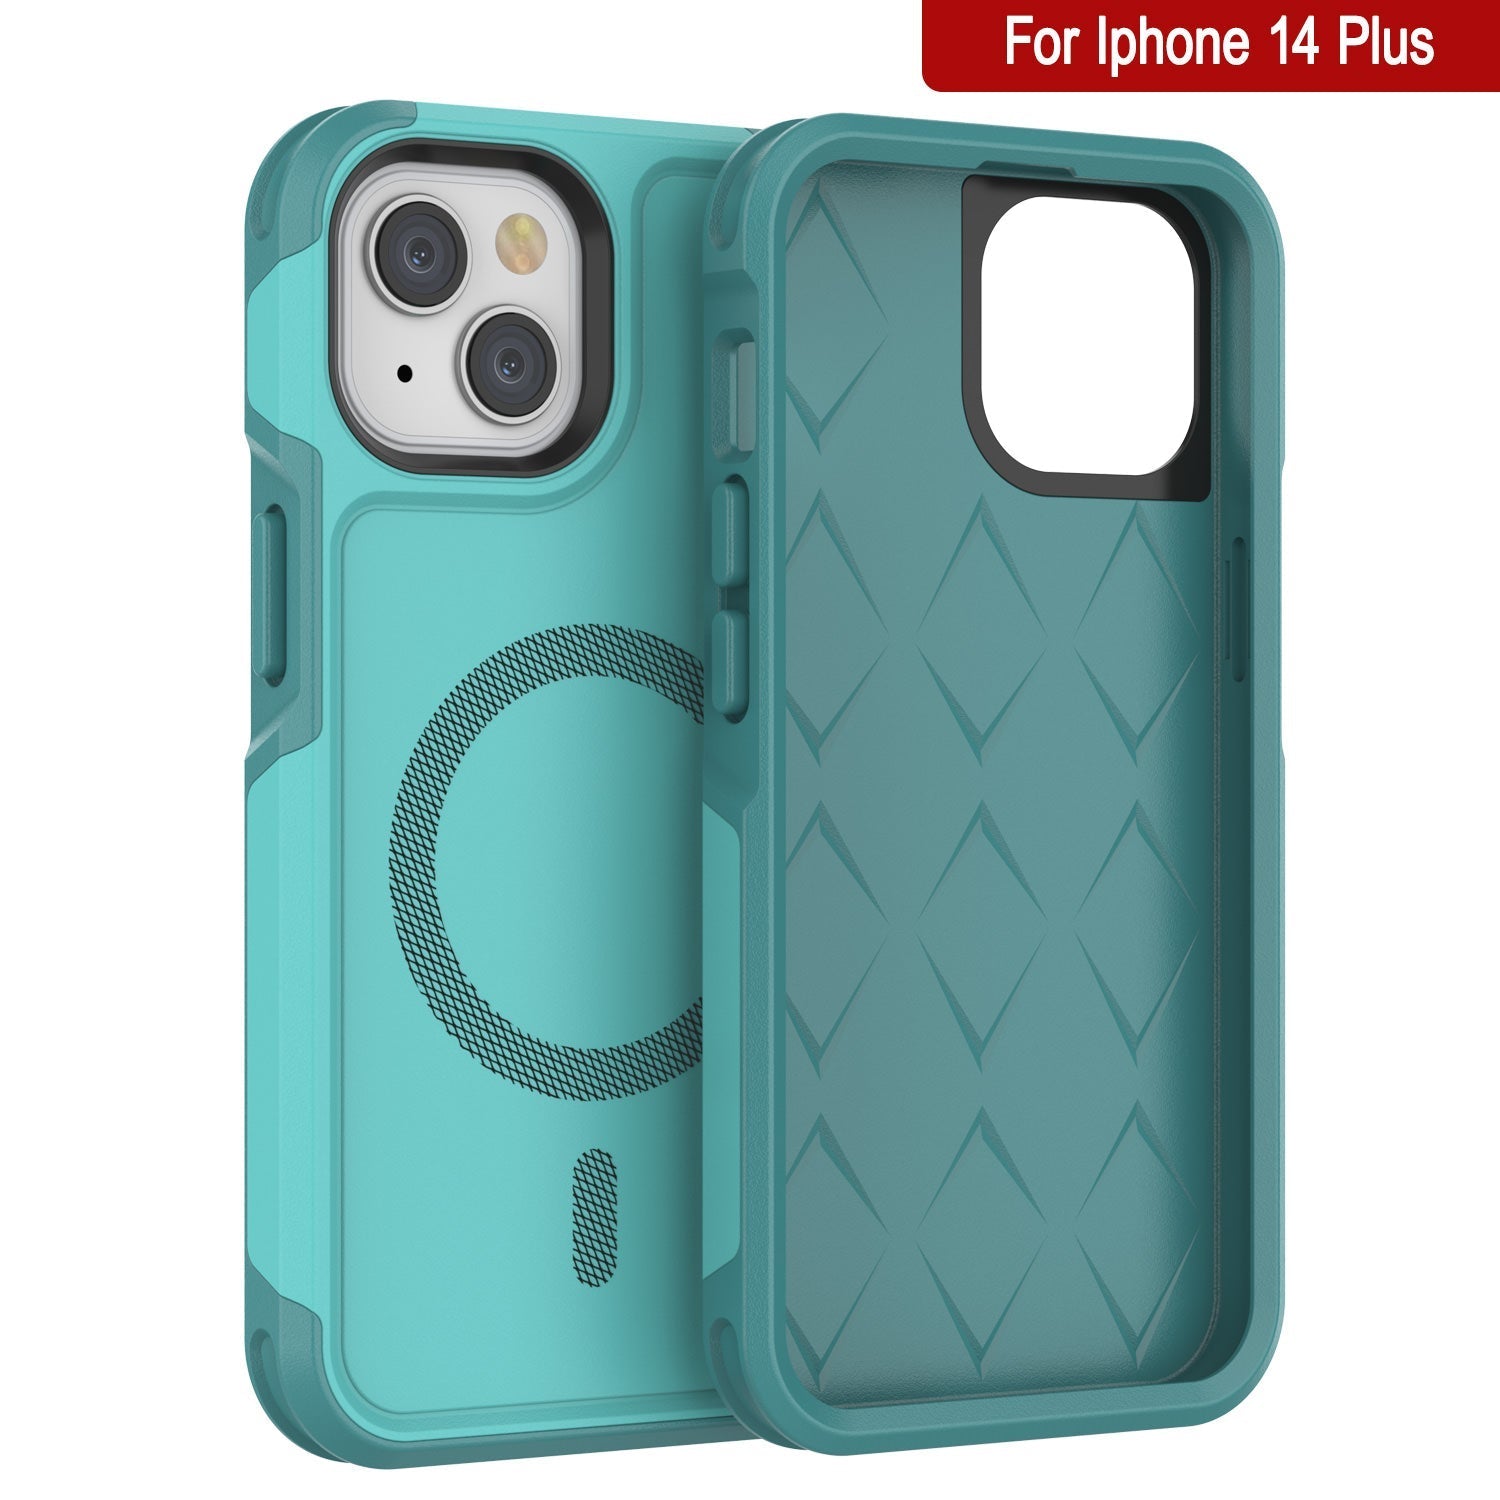 PunkCase iPhone 14 Plus Case, [Spartan 2.0 Series] Clear Rugged Heavy Duty Cover W/Built in Screen Protector [Blue]